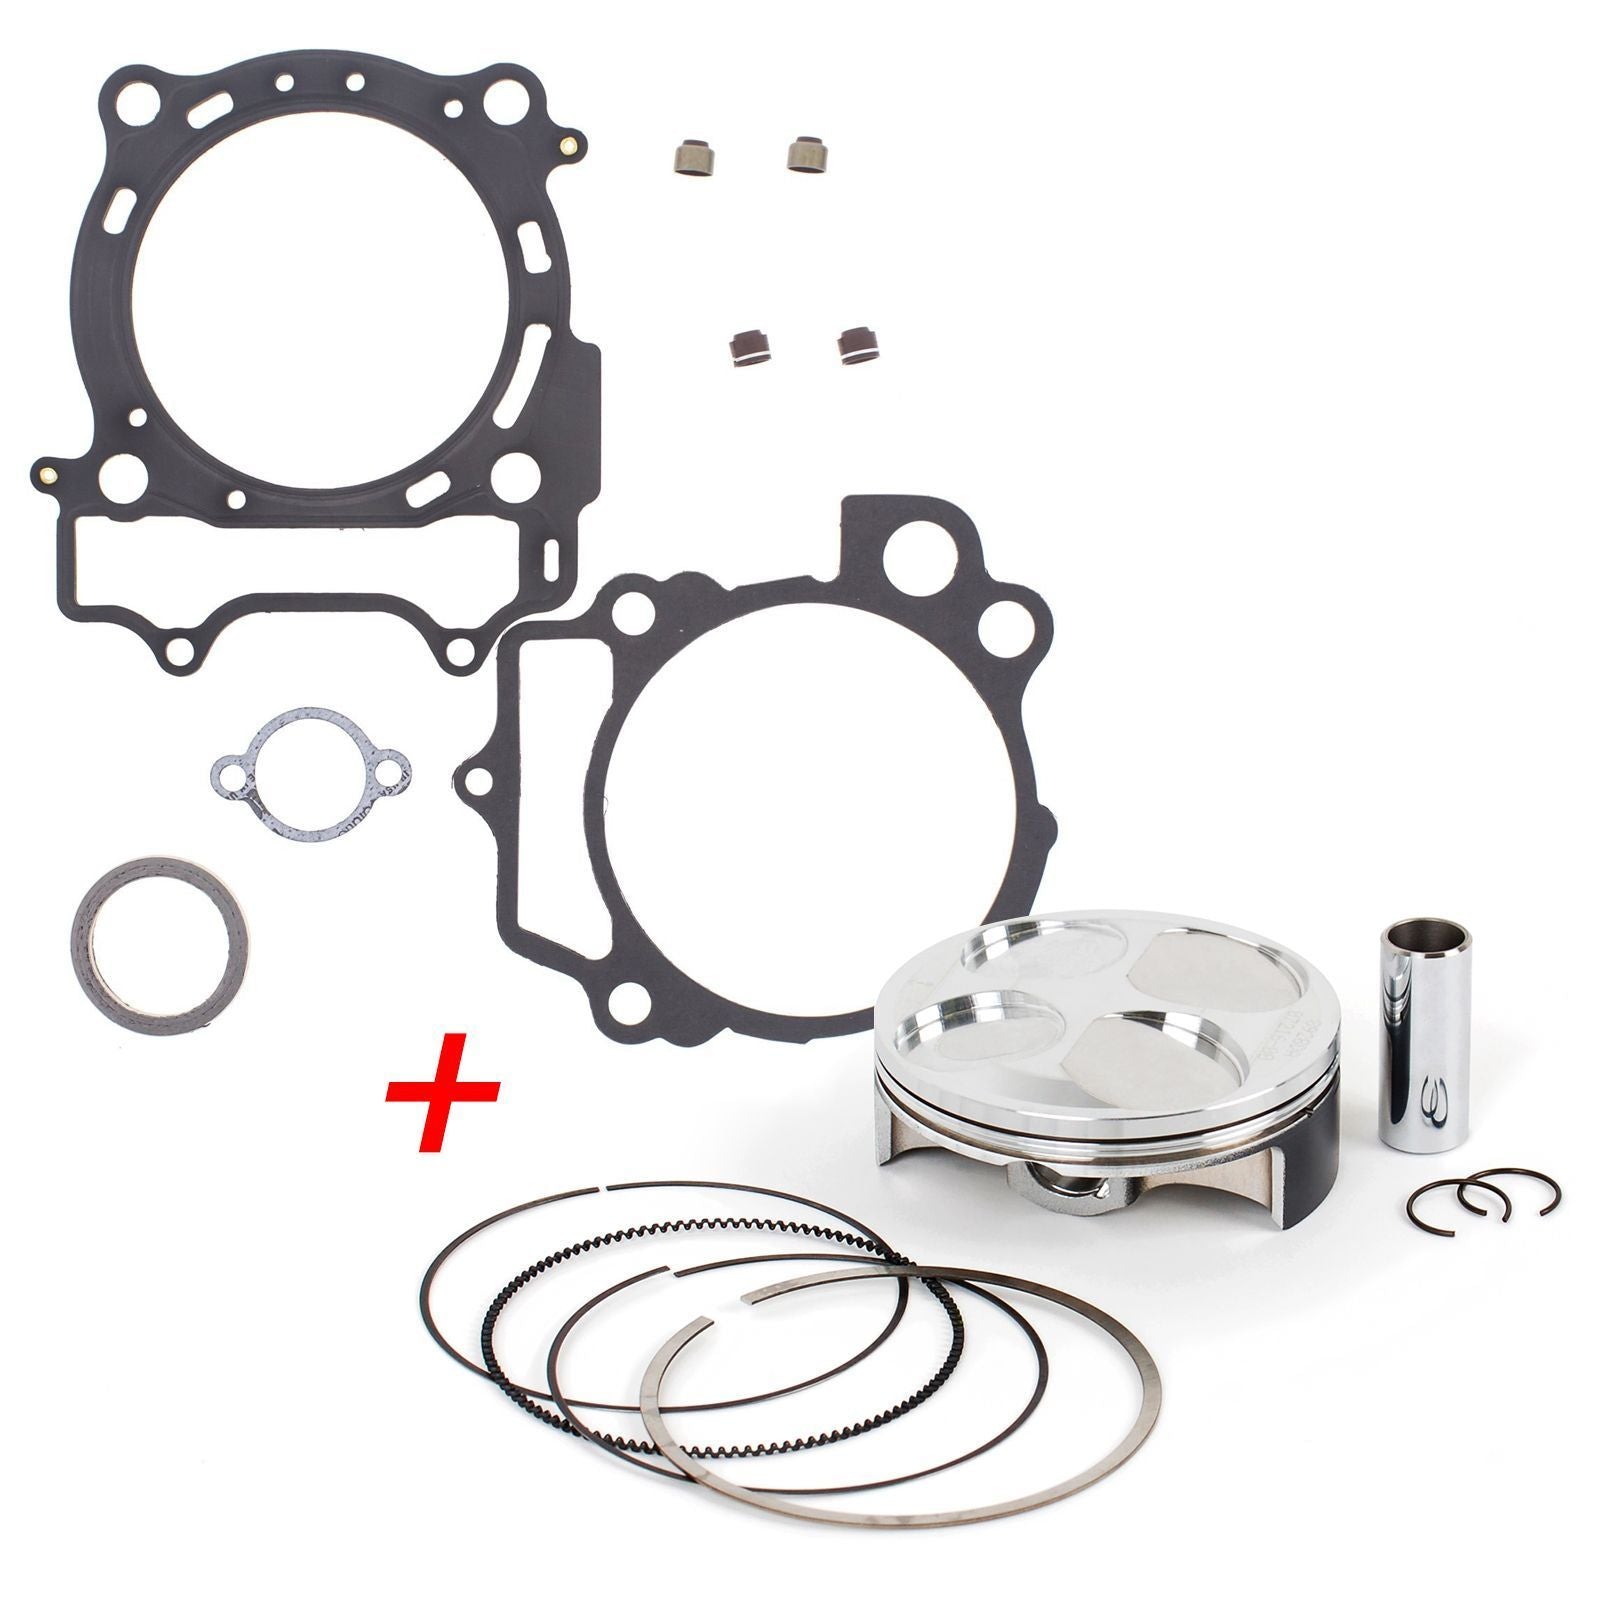 New Top End Rebuild Kit (A PRO) For Yamaha YZ250F 2016-2018 #ERTY009AP